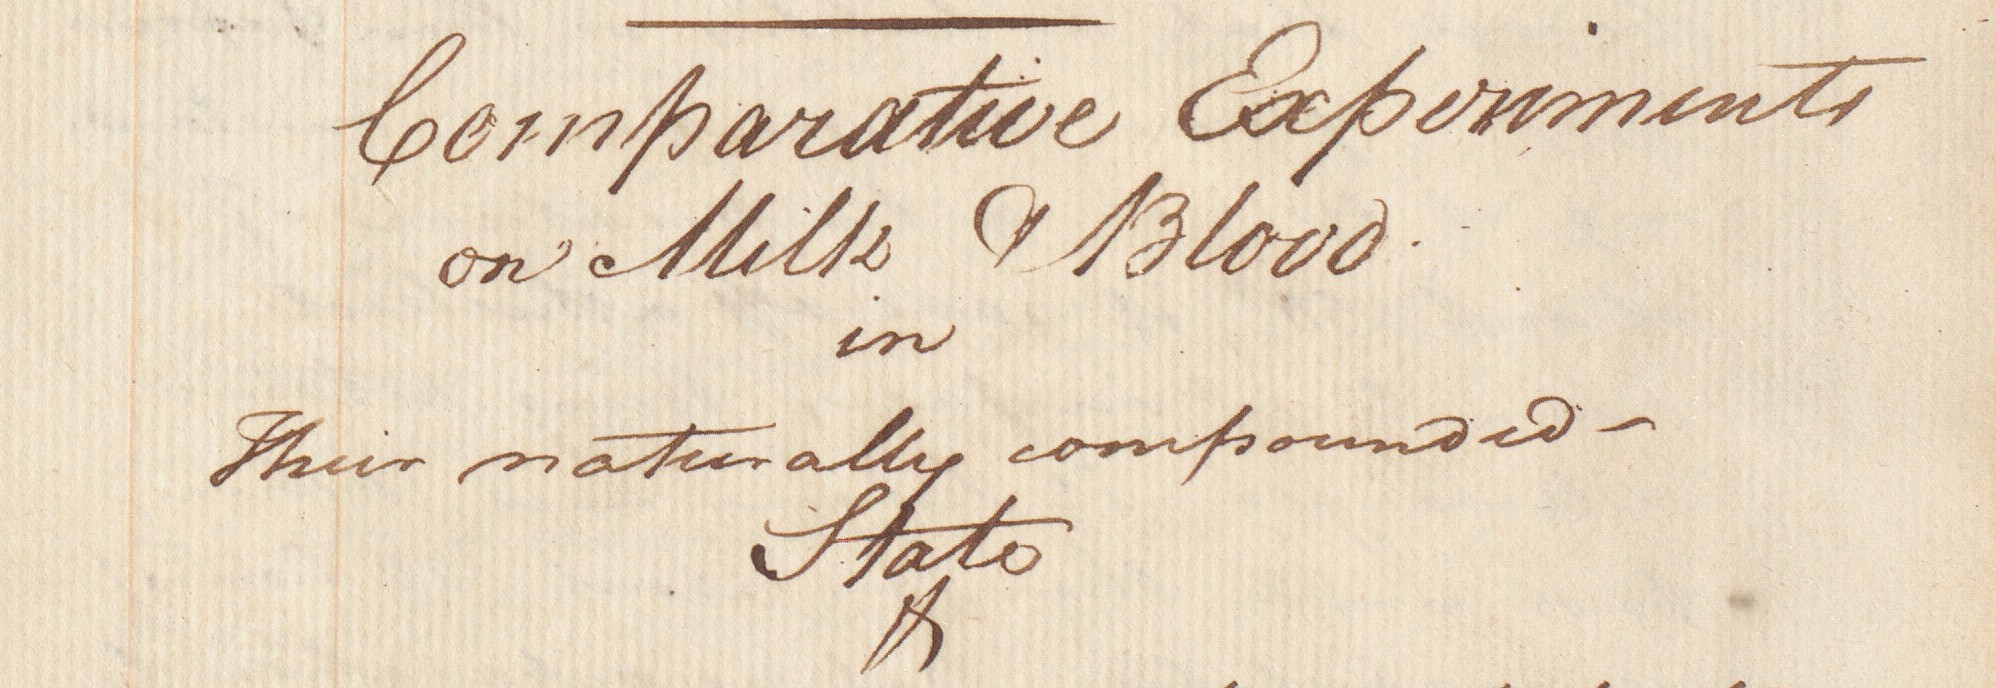 "Comparative Experiments on Mills Blood." Detail from page 27 of the George Box Drayton notebook. 1802-1840